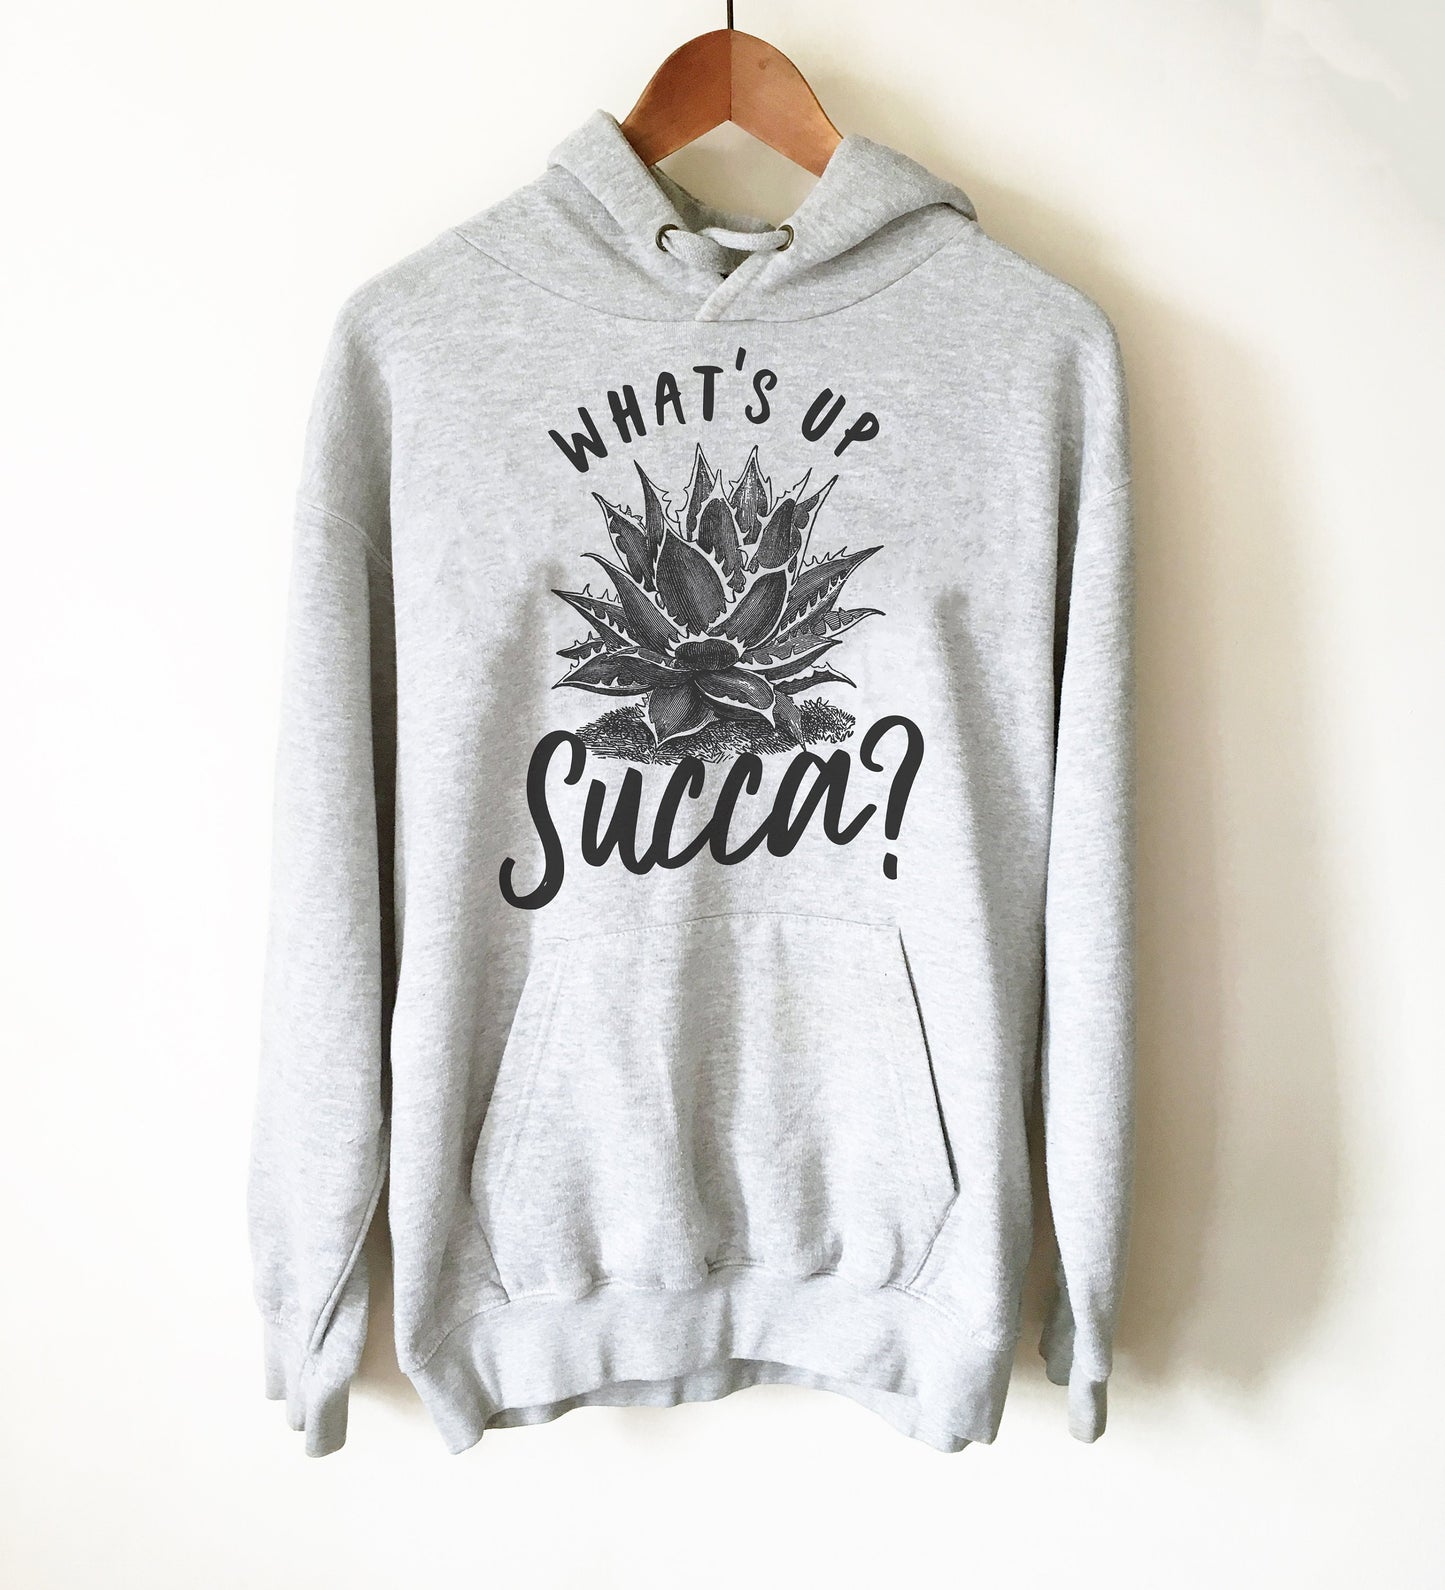 What's Up Succa? Hoodie - Cactus Shirt, Cactus Gift, Succulent Shirt, Succulent Gift, Gardening Shirt, Gardening Gift